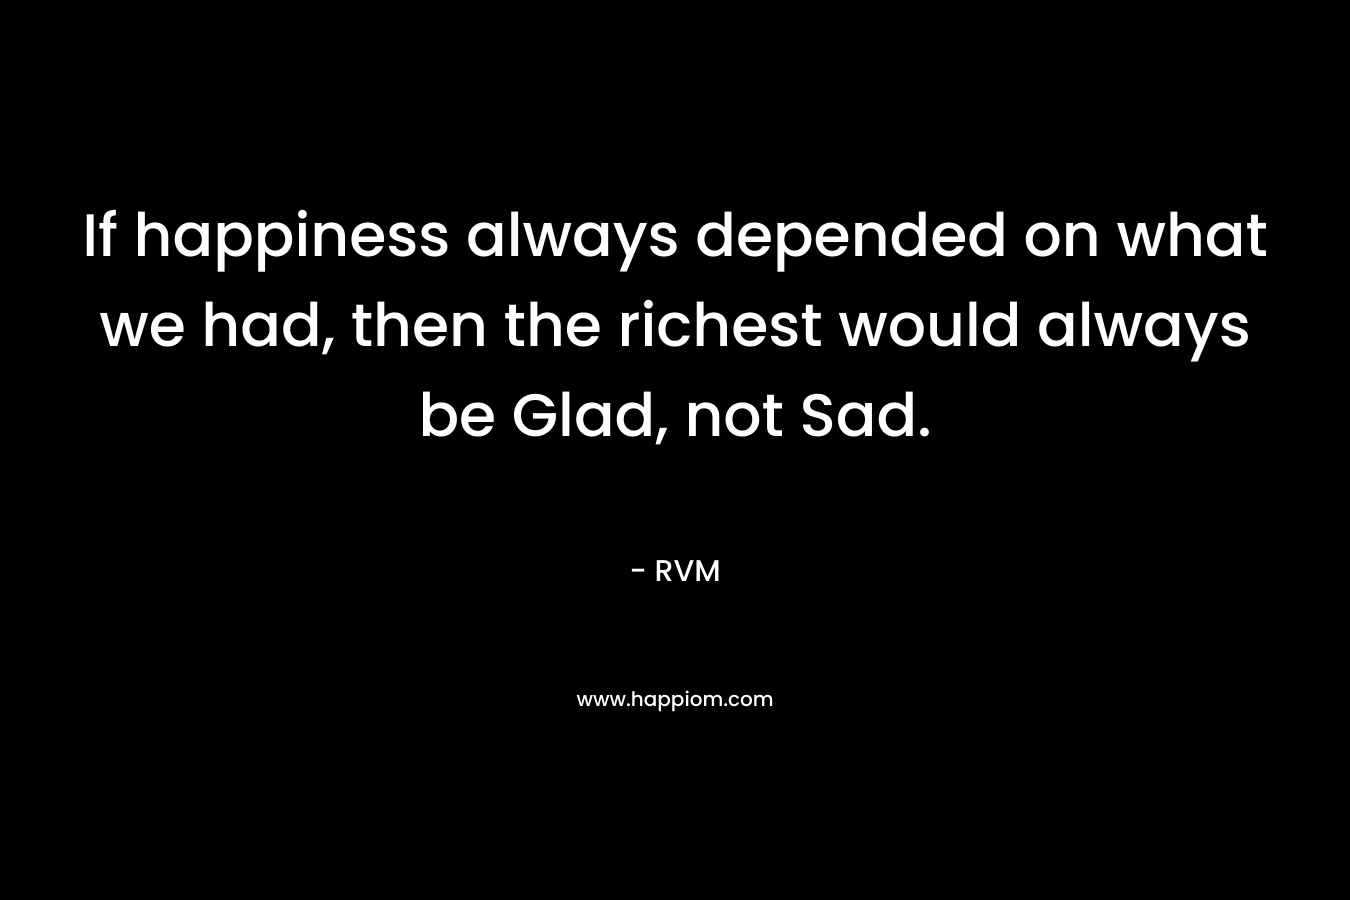 If happiness always depended on what we had, then the richest would always be Glad, not Sad.